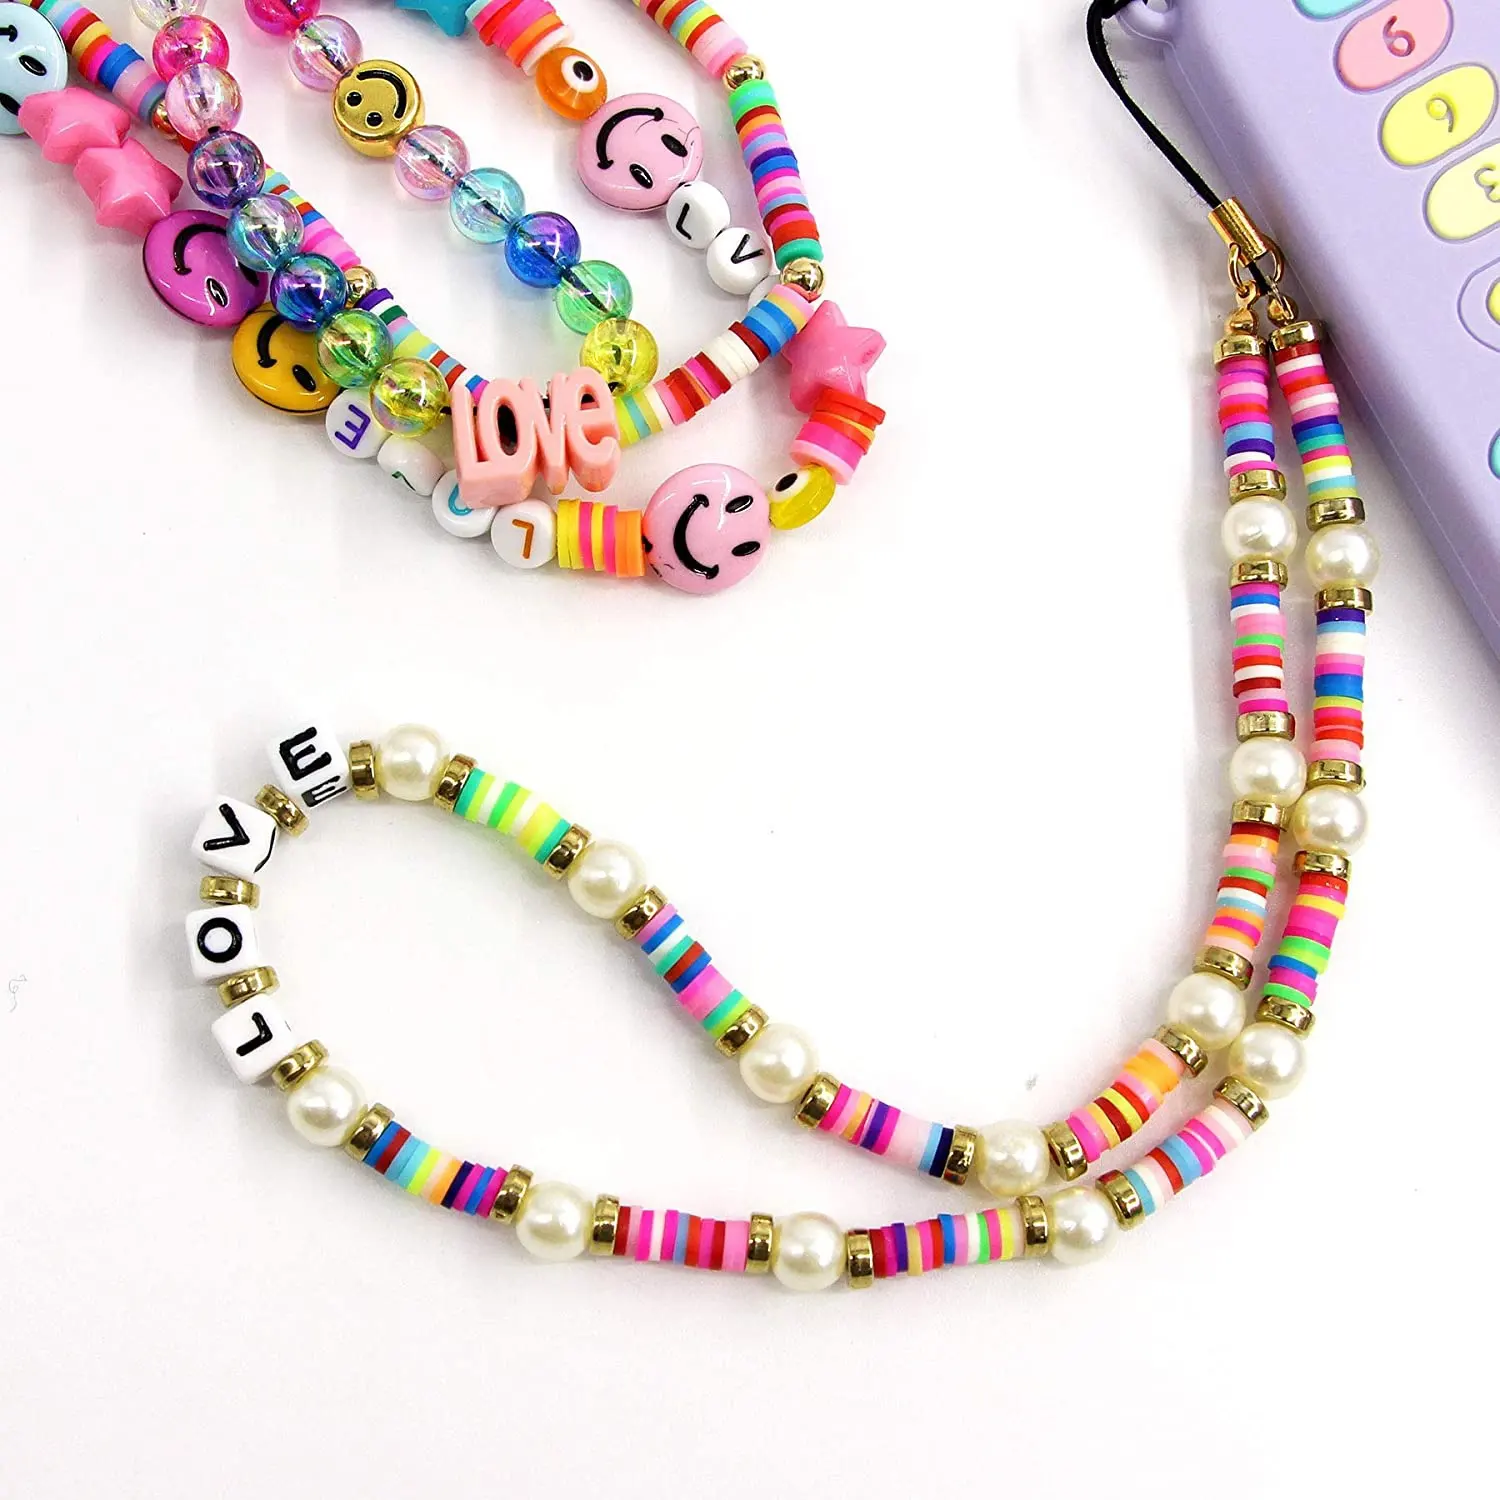 Fashion Jewelry beaded Rainbow Fruit smaily face style mobile phone chains beads women phone strap phone charms